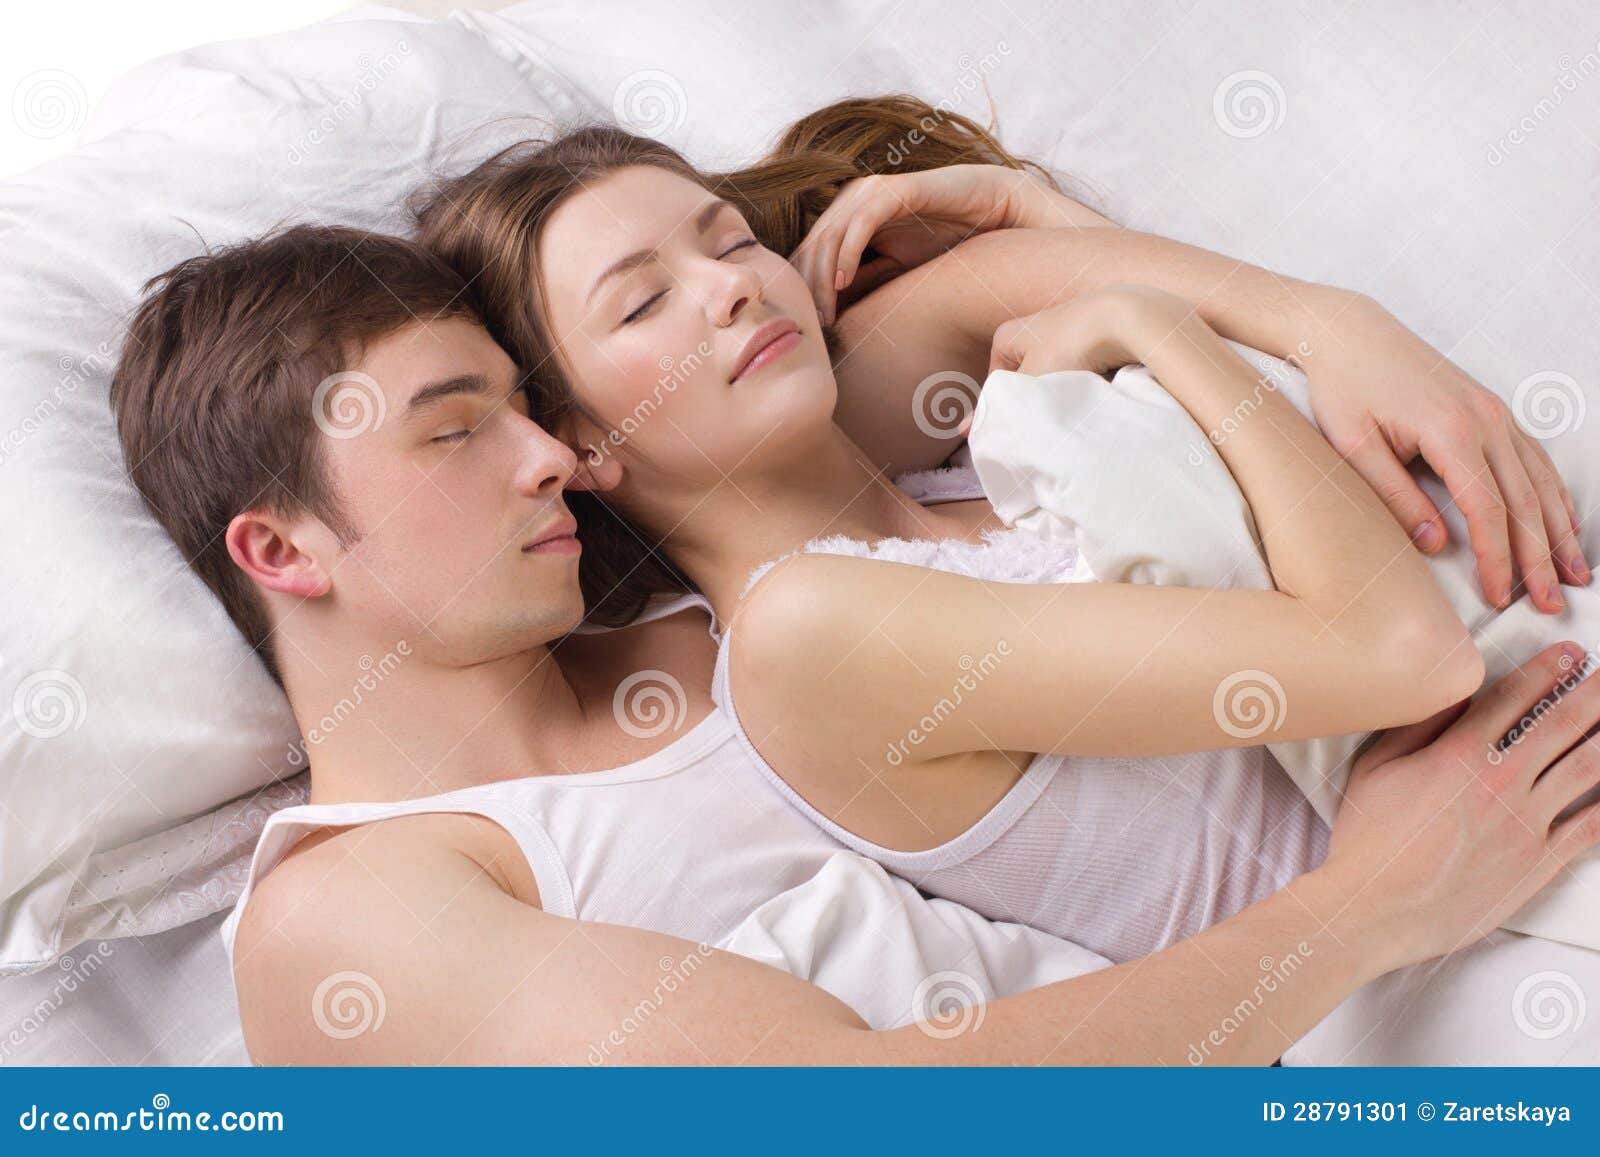 Young Man And Woman In A Bed Stock Image - Image: 28791301